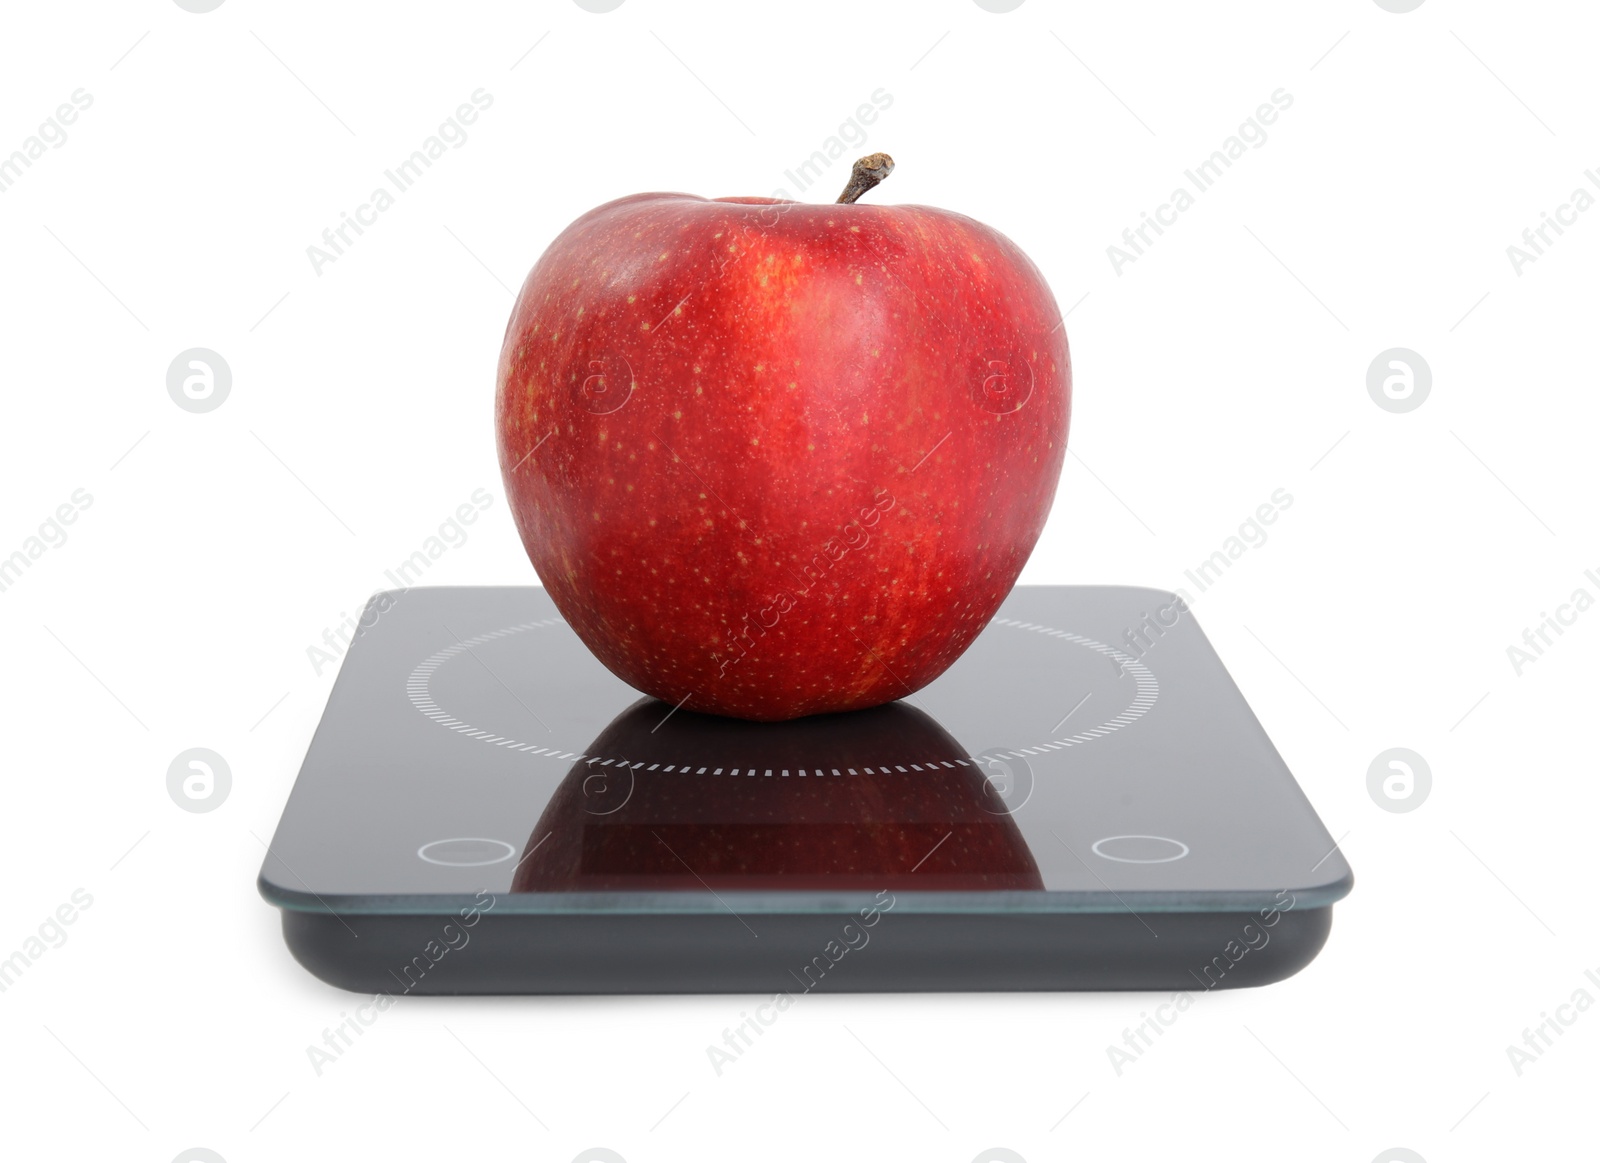 Photo of Ripe red apple and electronic scales on white background